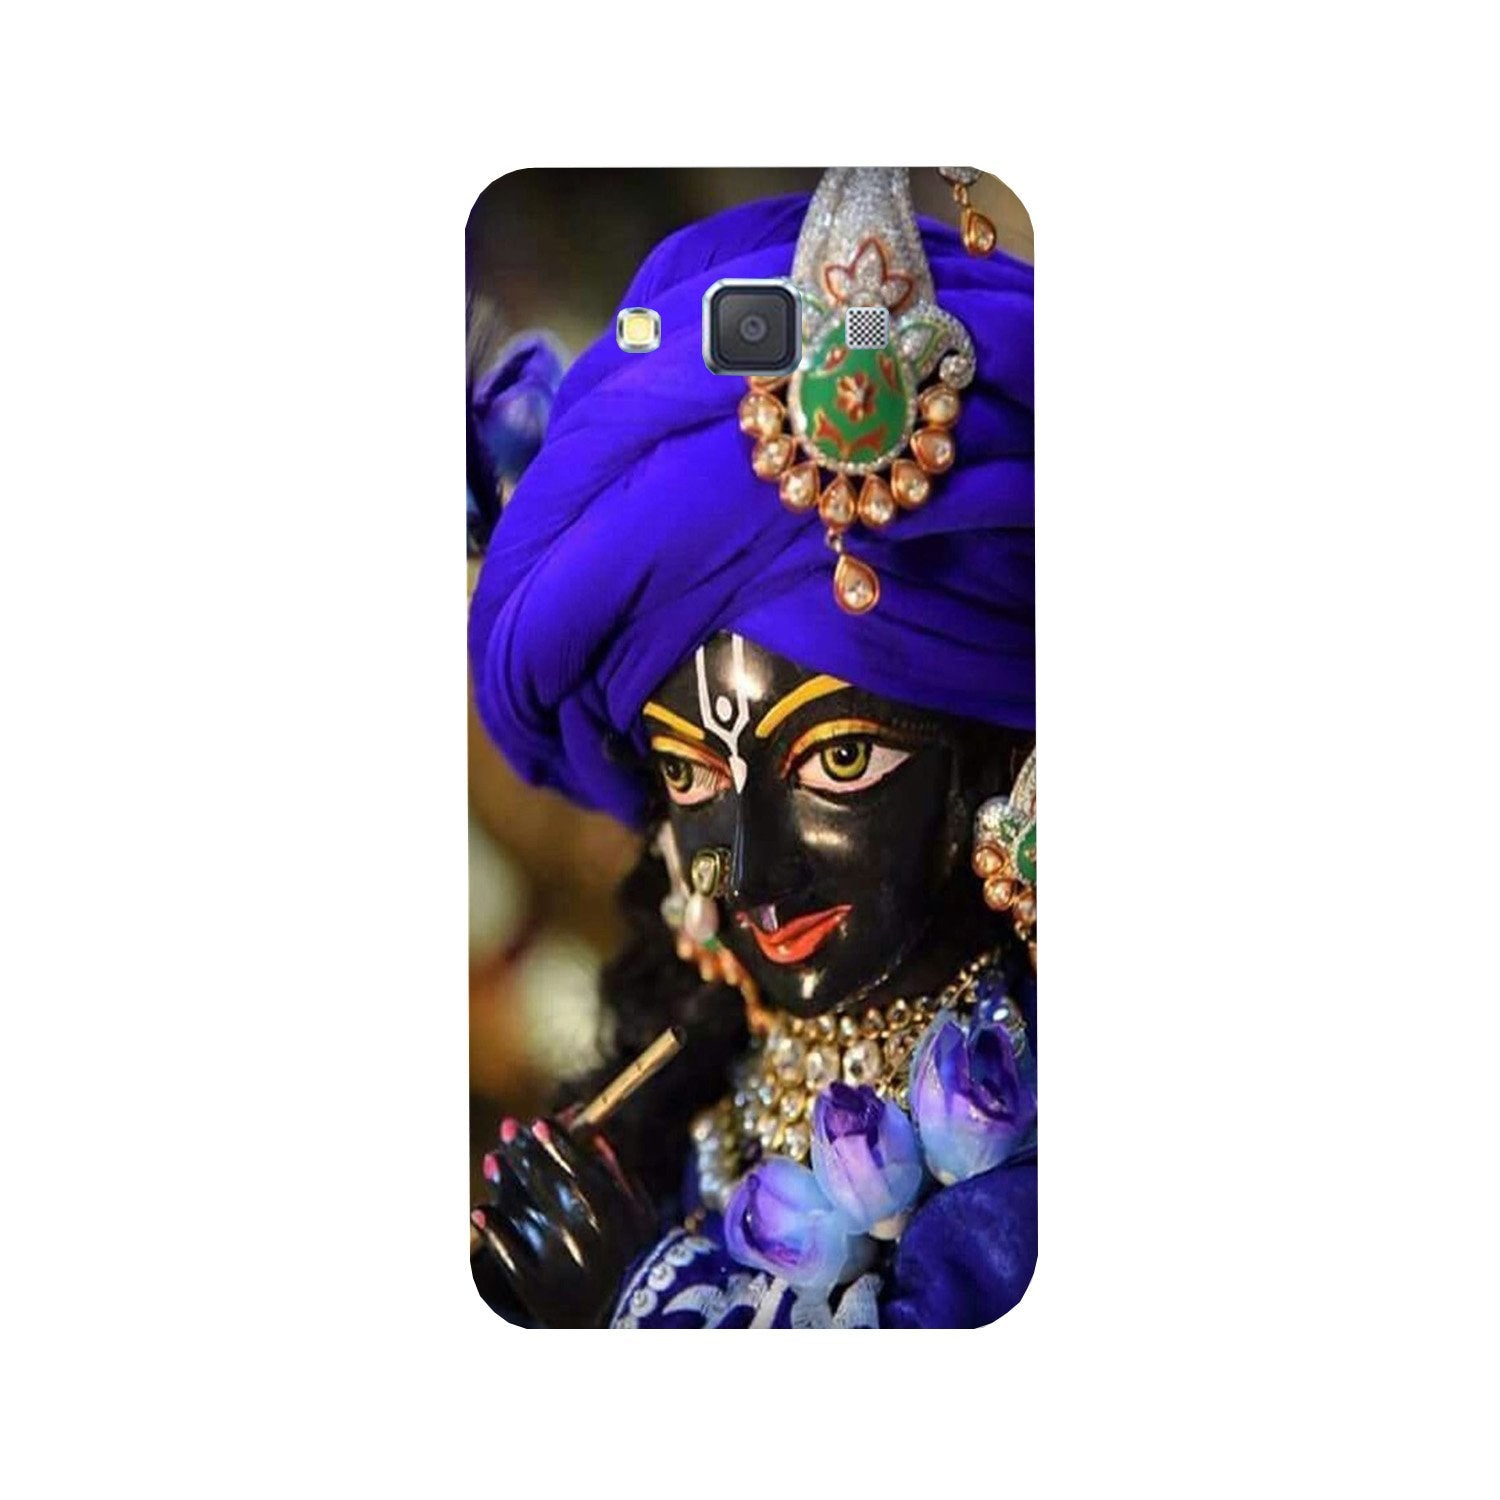 Lord Krishna4 Case for Galaxy ON7/ON7 Pro